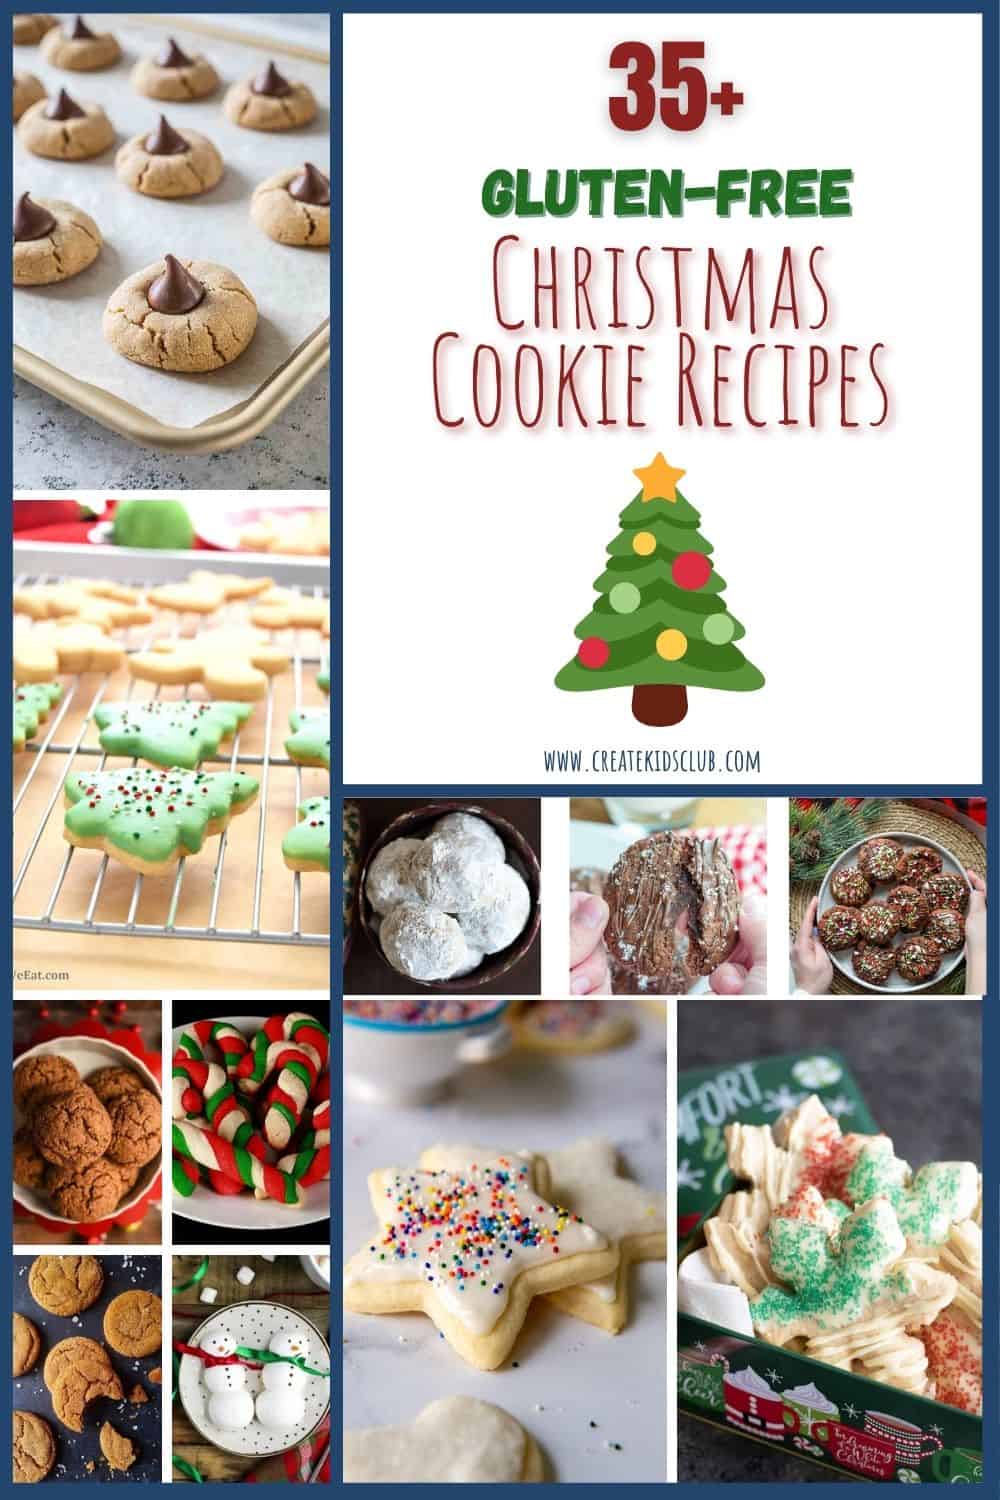 11 pictures of gluten free Christmas cookie recipes.